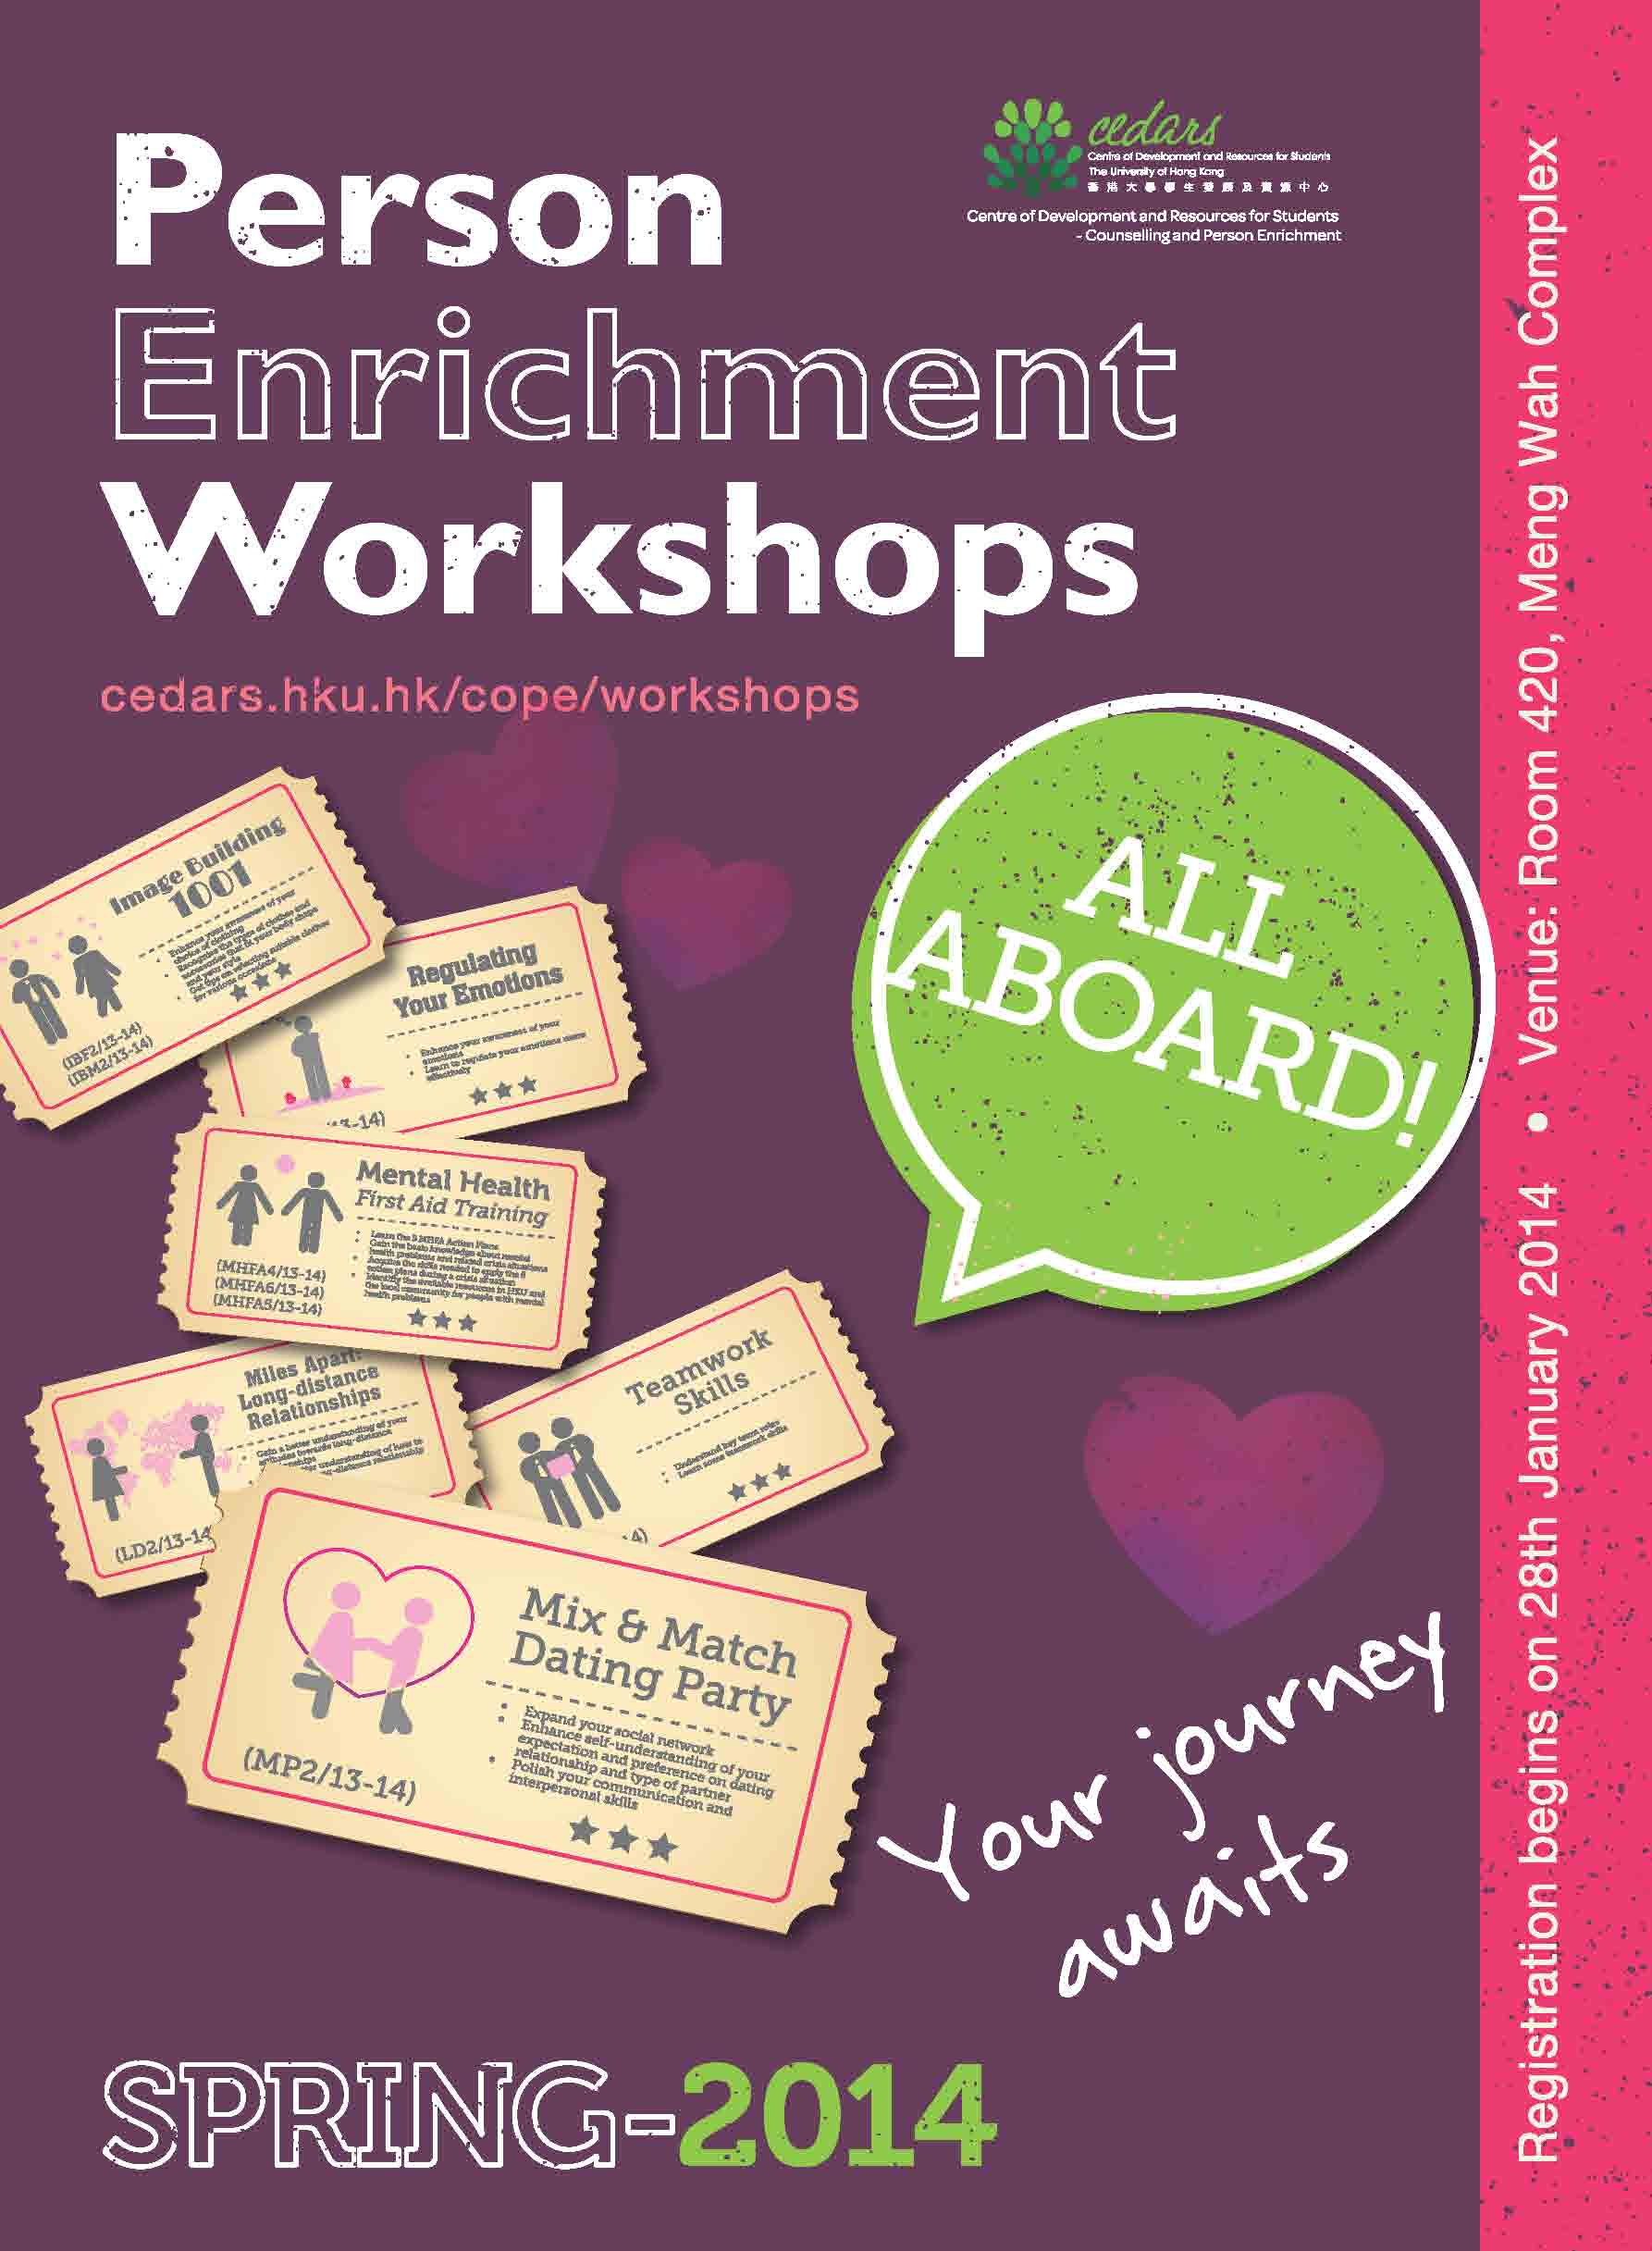 Your Journey Awaits! Enrol in Person Enrichment Workshops from 28 January onwards 